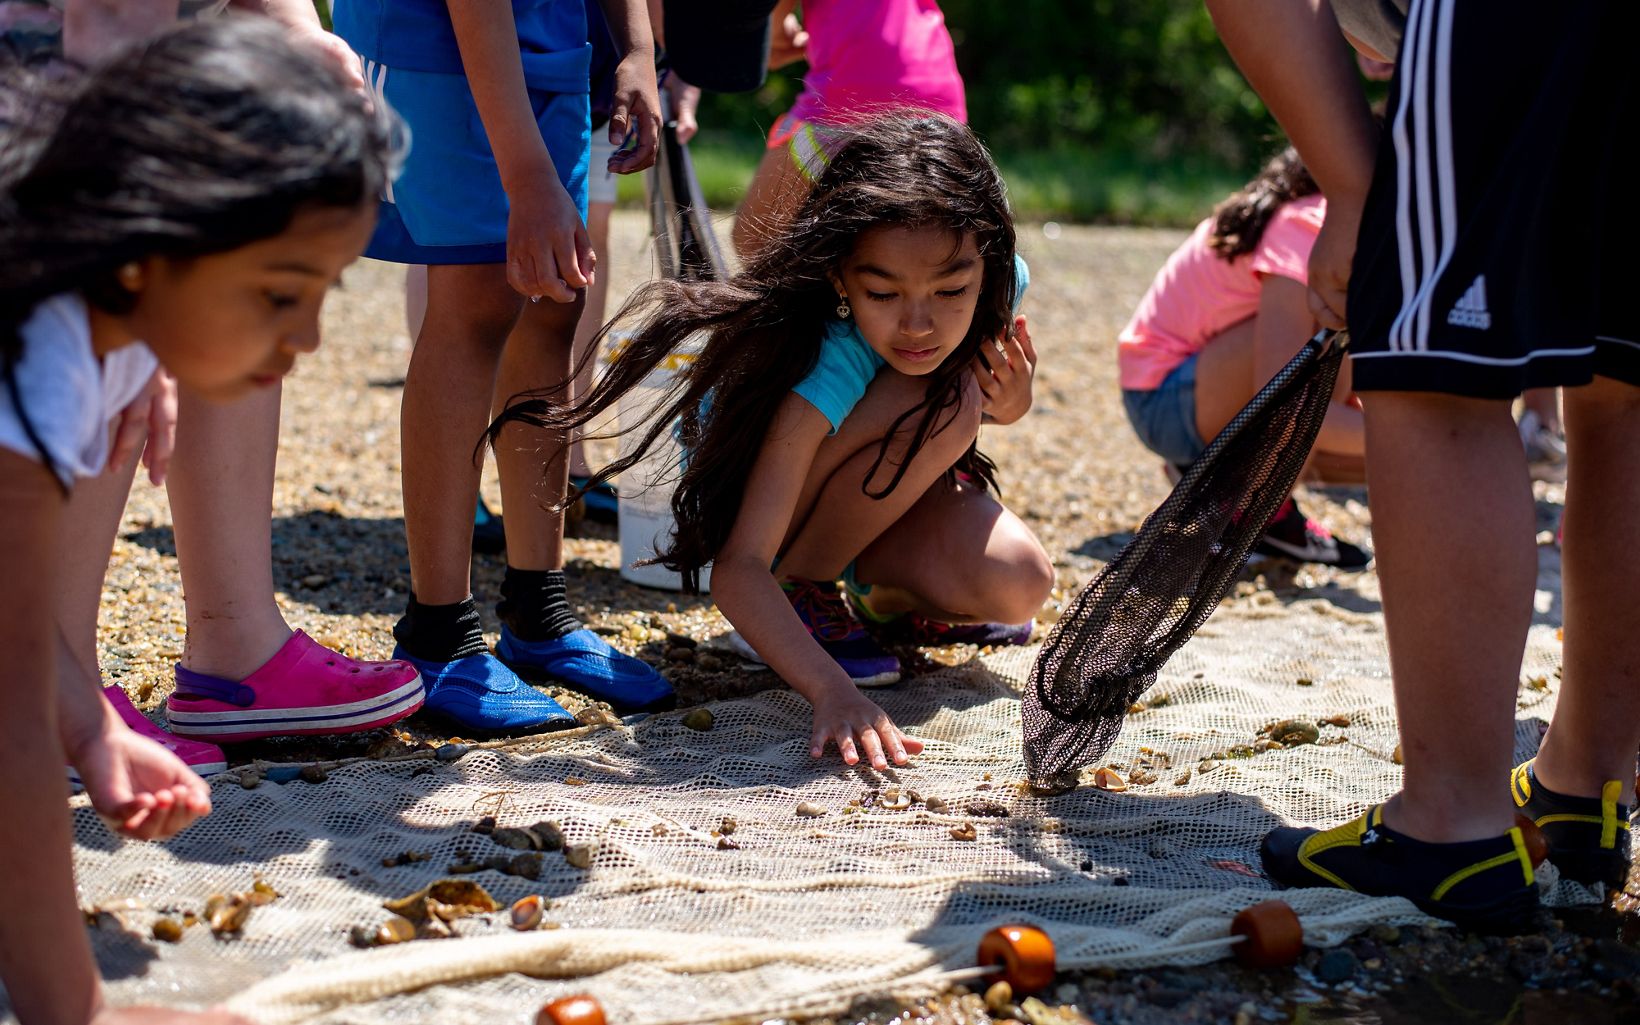 Kids kneel to sort through shells and minnows in a seine net on the beach.